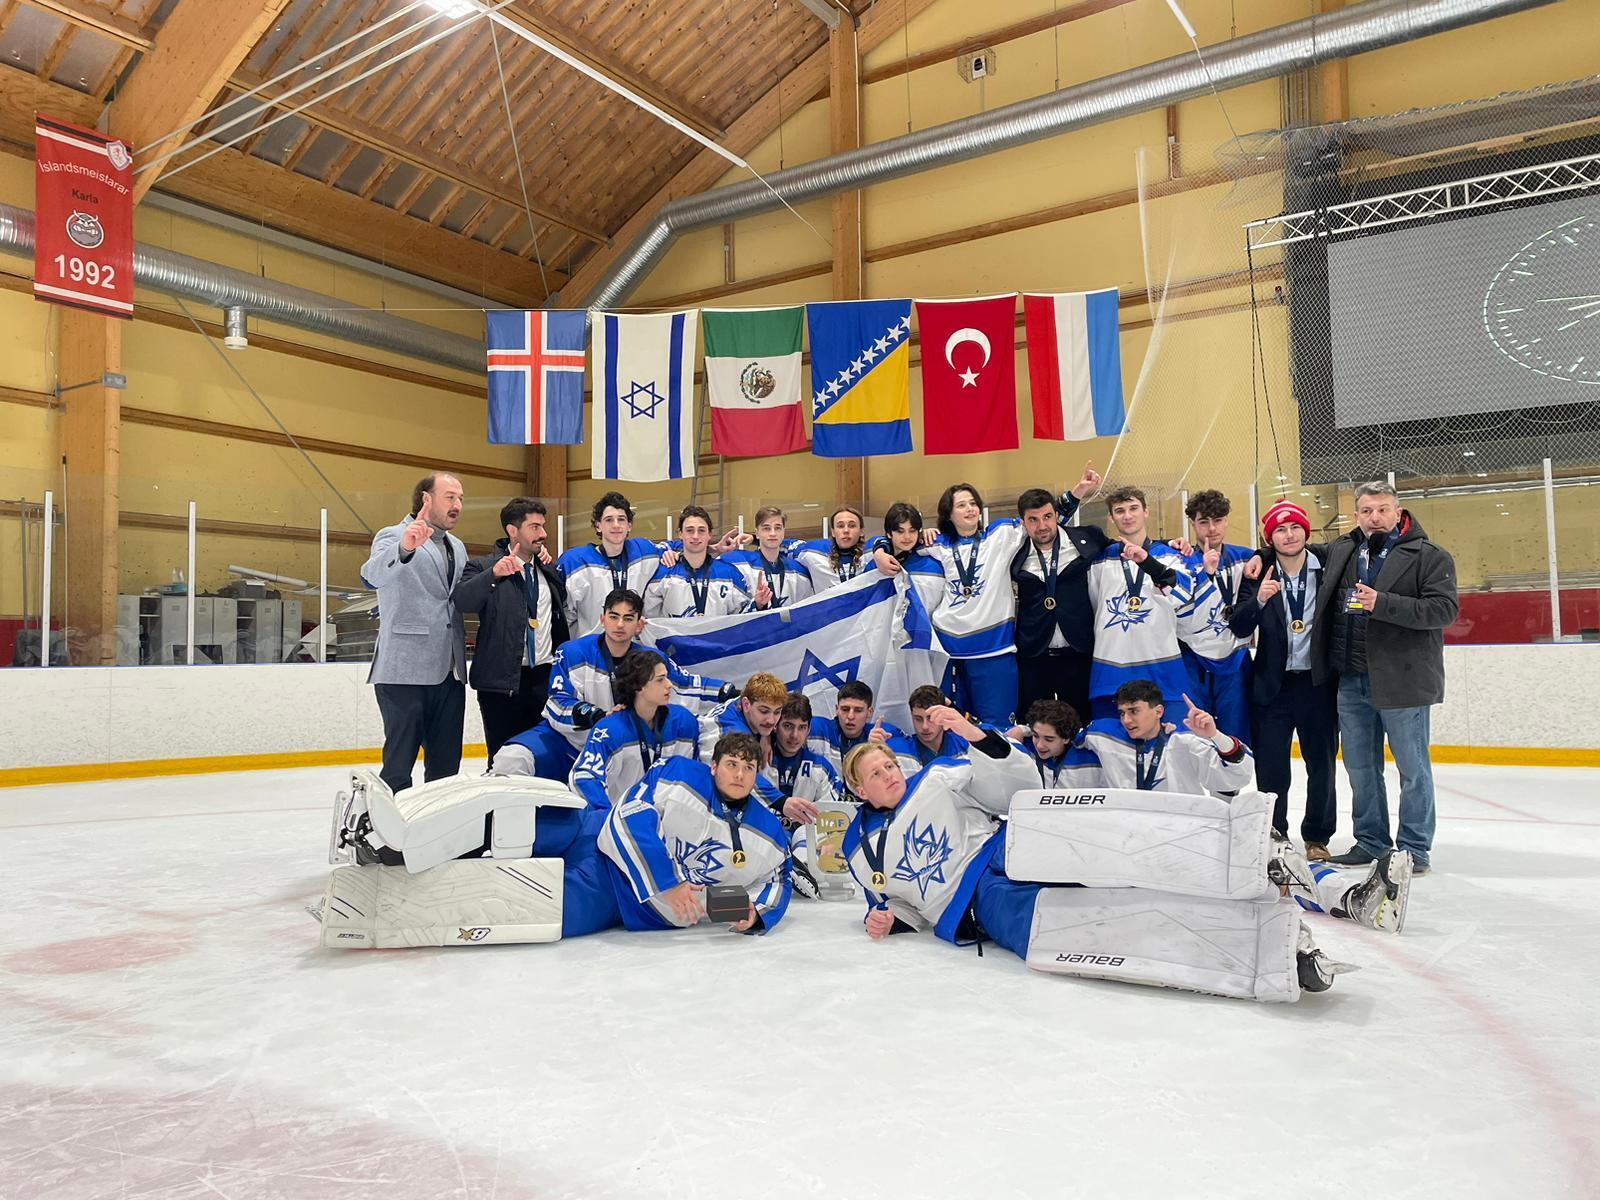 Holiday in Russia: Israeli national team was suspended from the World Hockey Championship